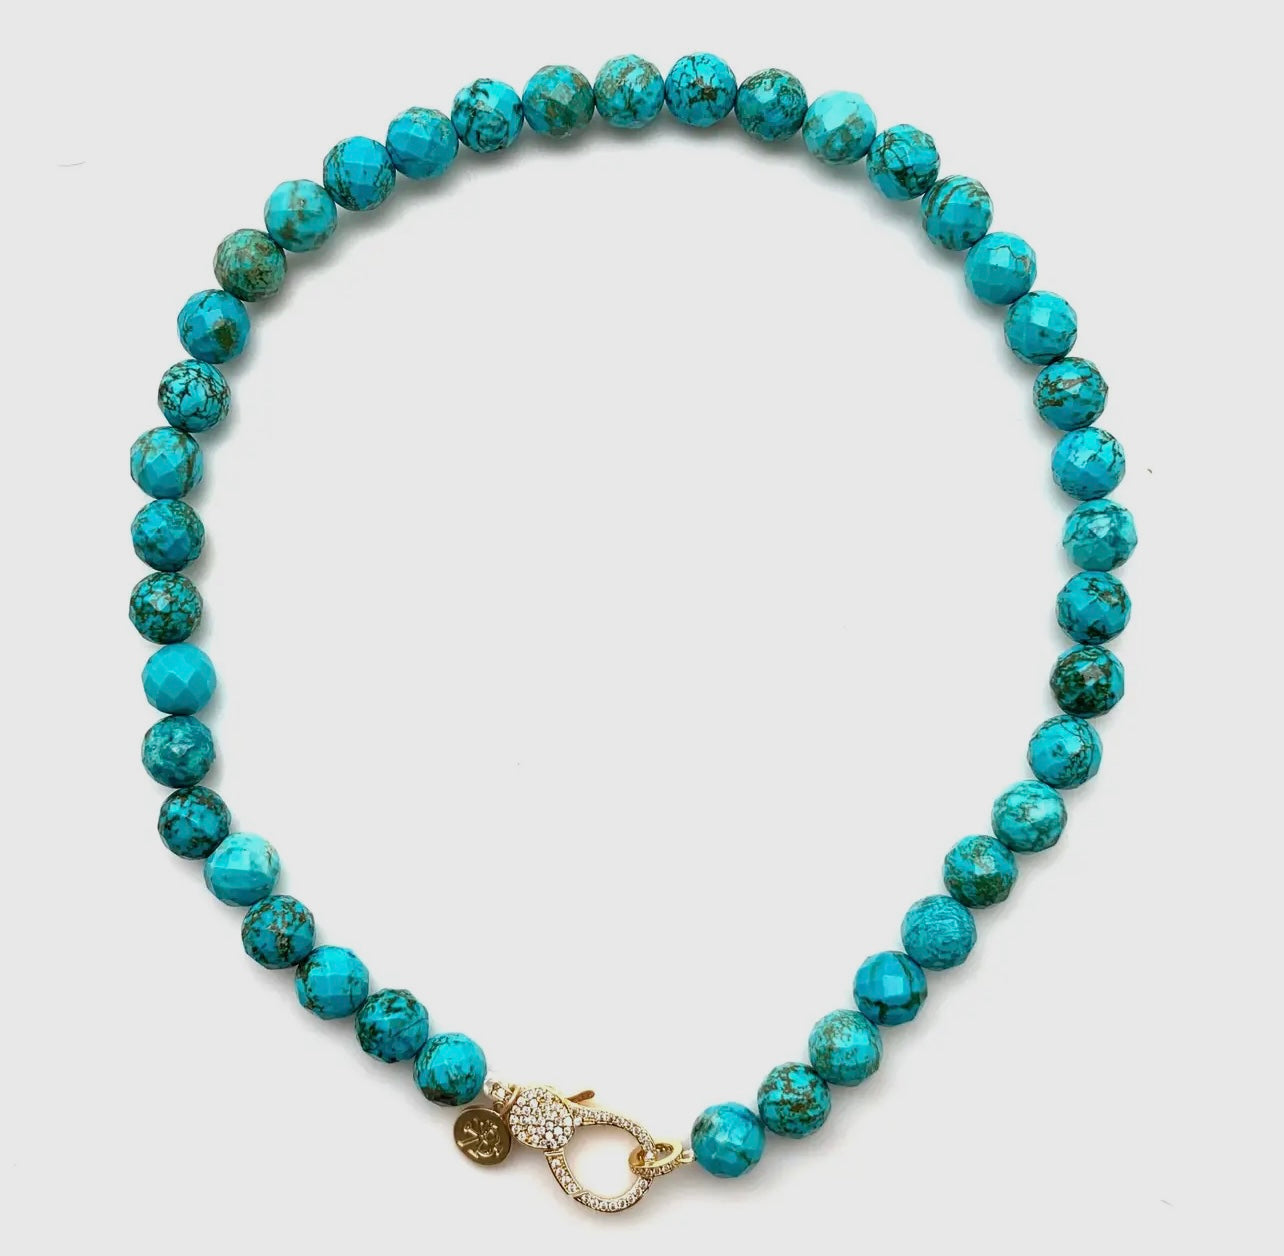 Turquoise Pavé Clasp Necklace by Karli Buxton